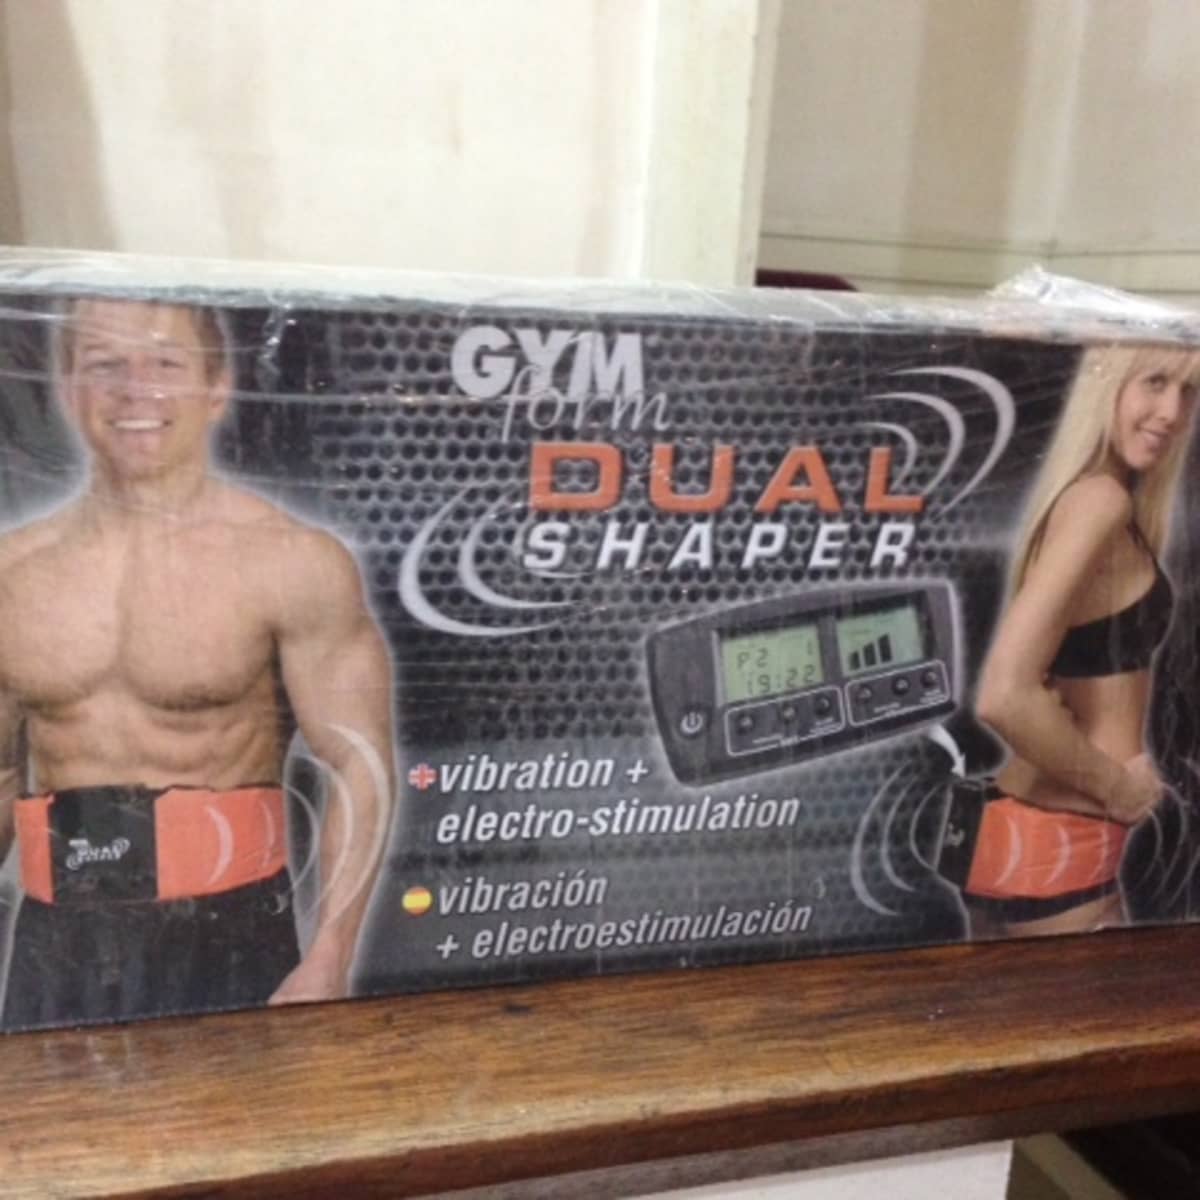 Gym Form Dual Shaper - Product Review: Does it Work? - HubPages